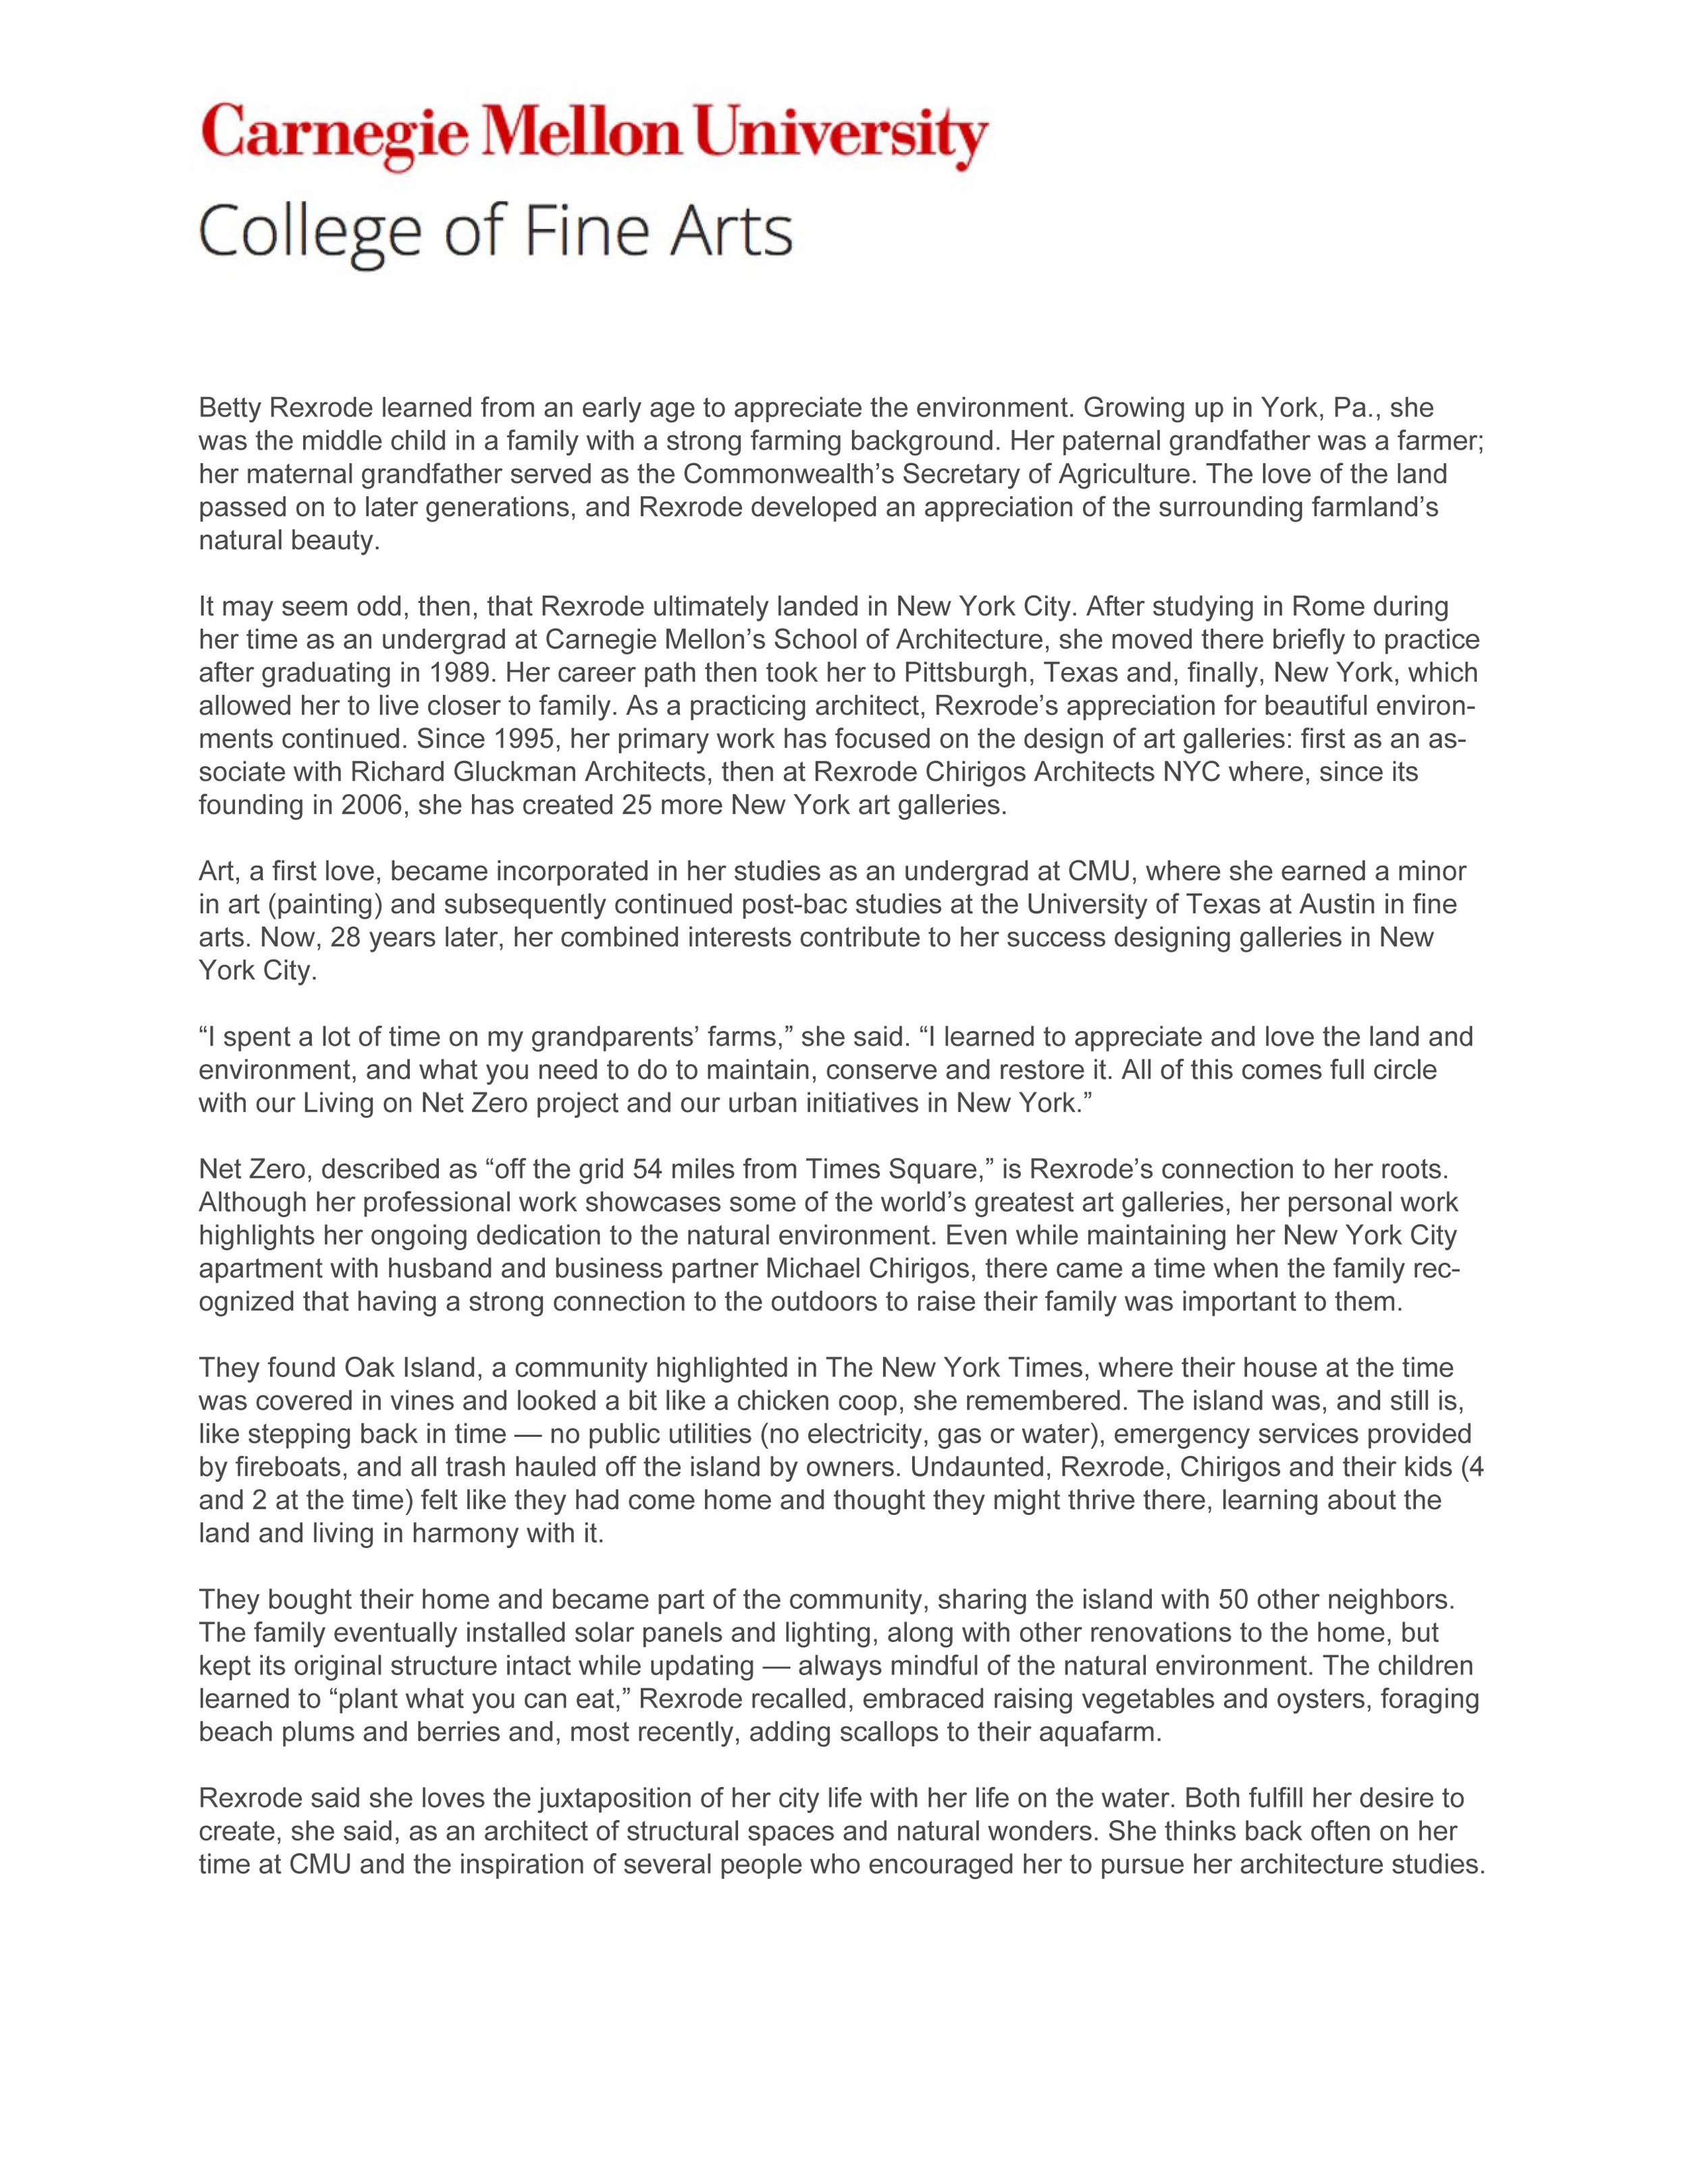 CMU Article - Text Page 1.jpg